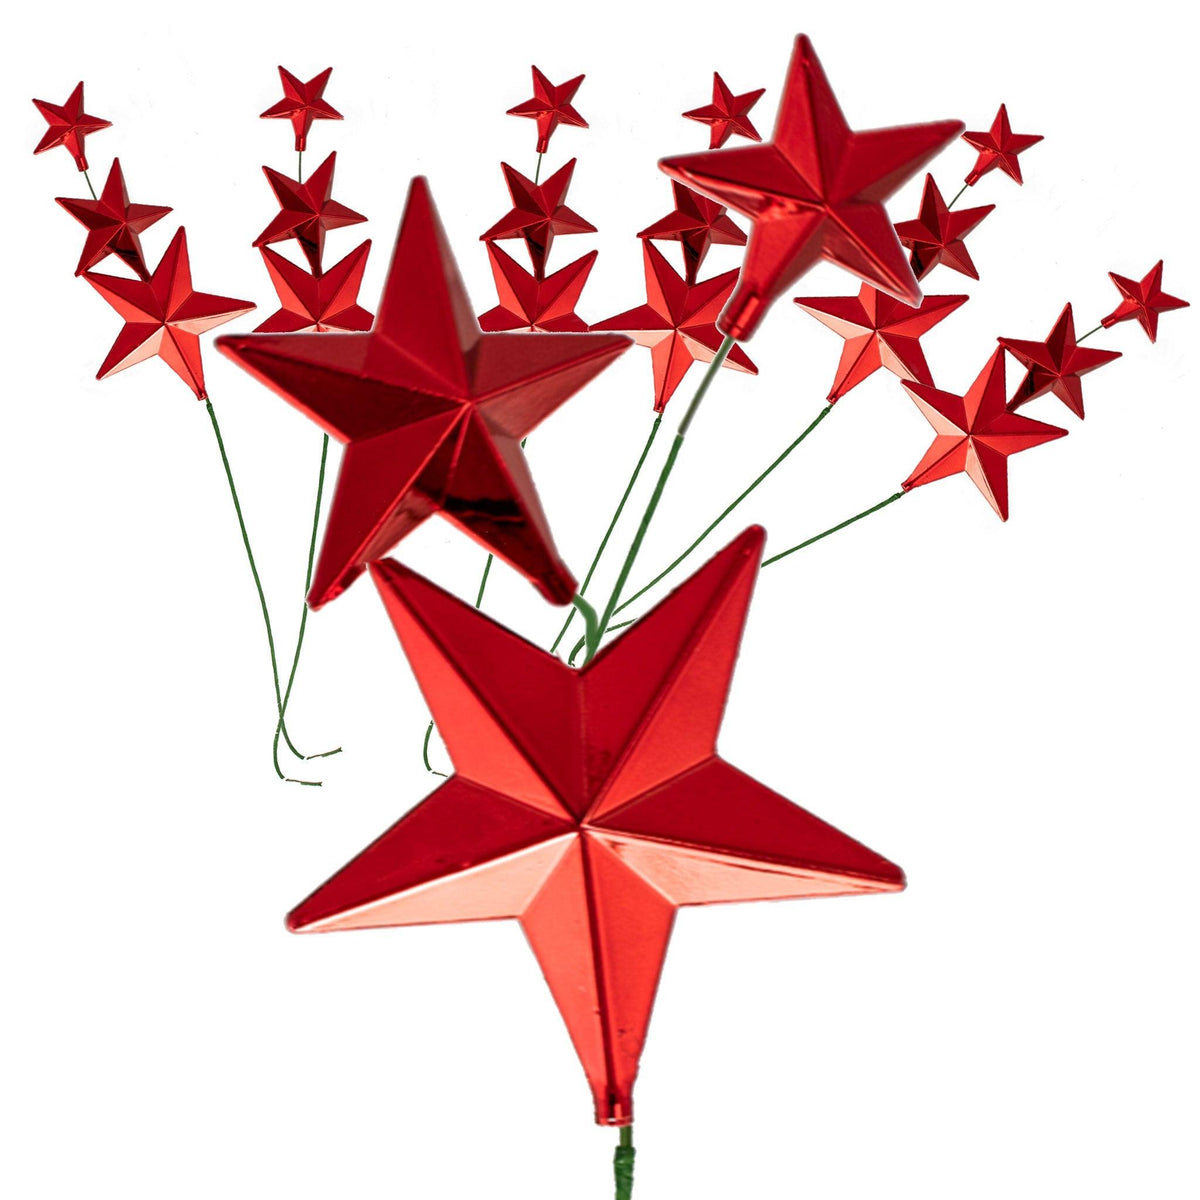 Introducing Lee Display's stunning Red Star Pick Ornaments! These dazzling ornaments are perfect for adding a touch of glamour and sophistication to any Christmas tree or holiday decor.